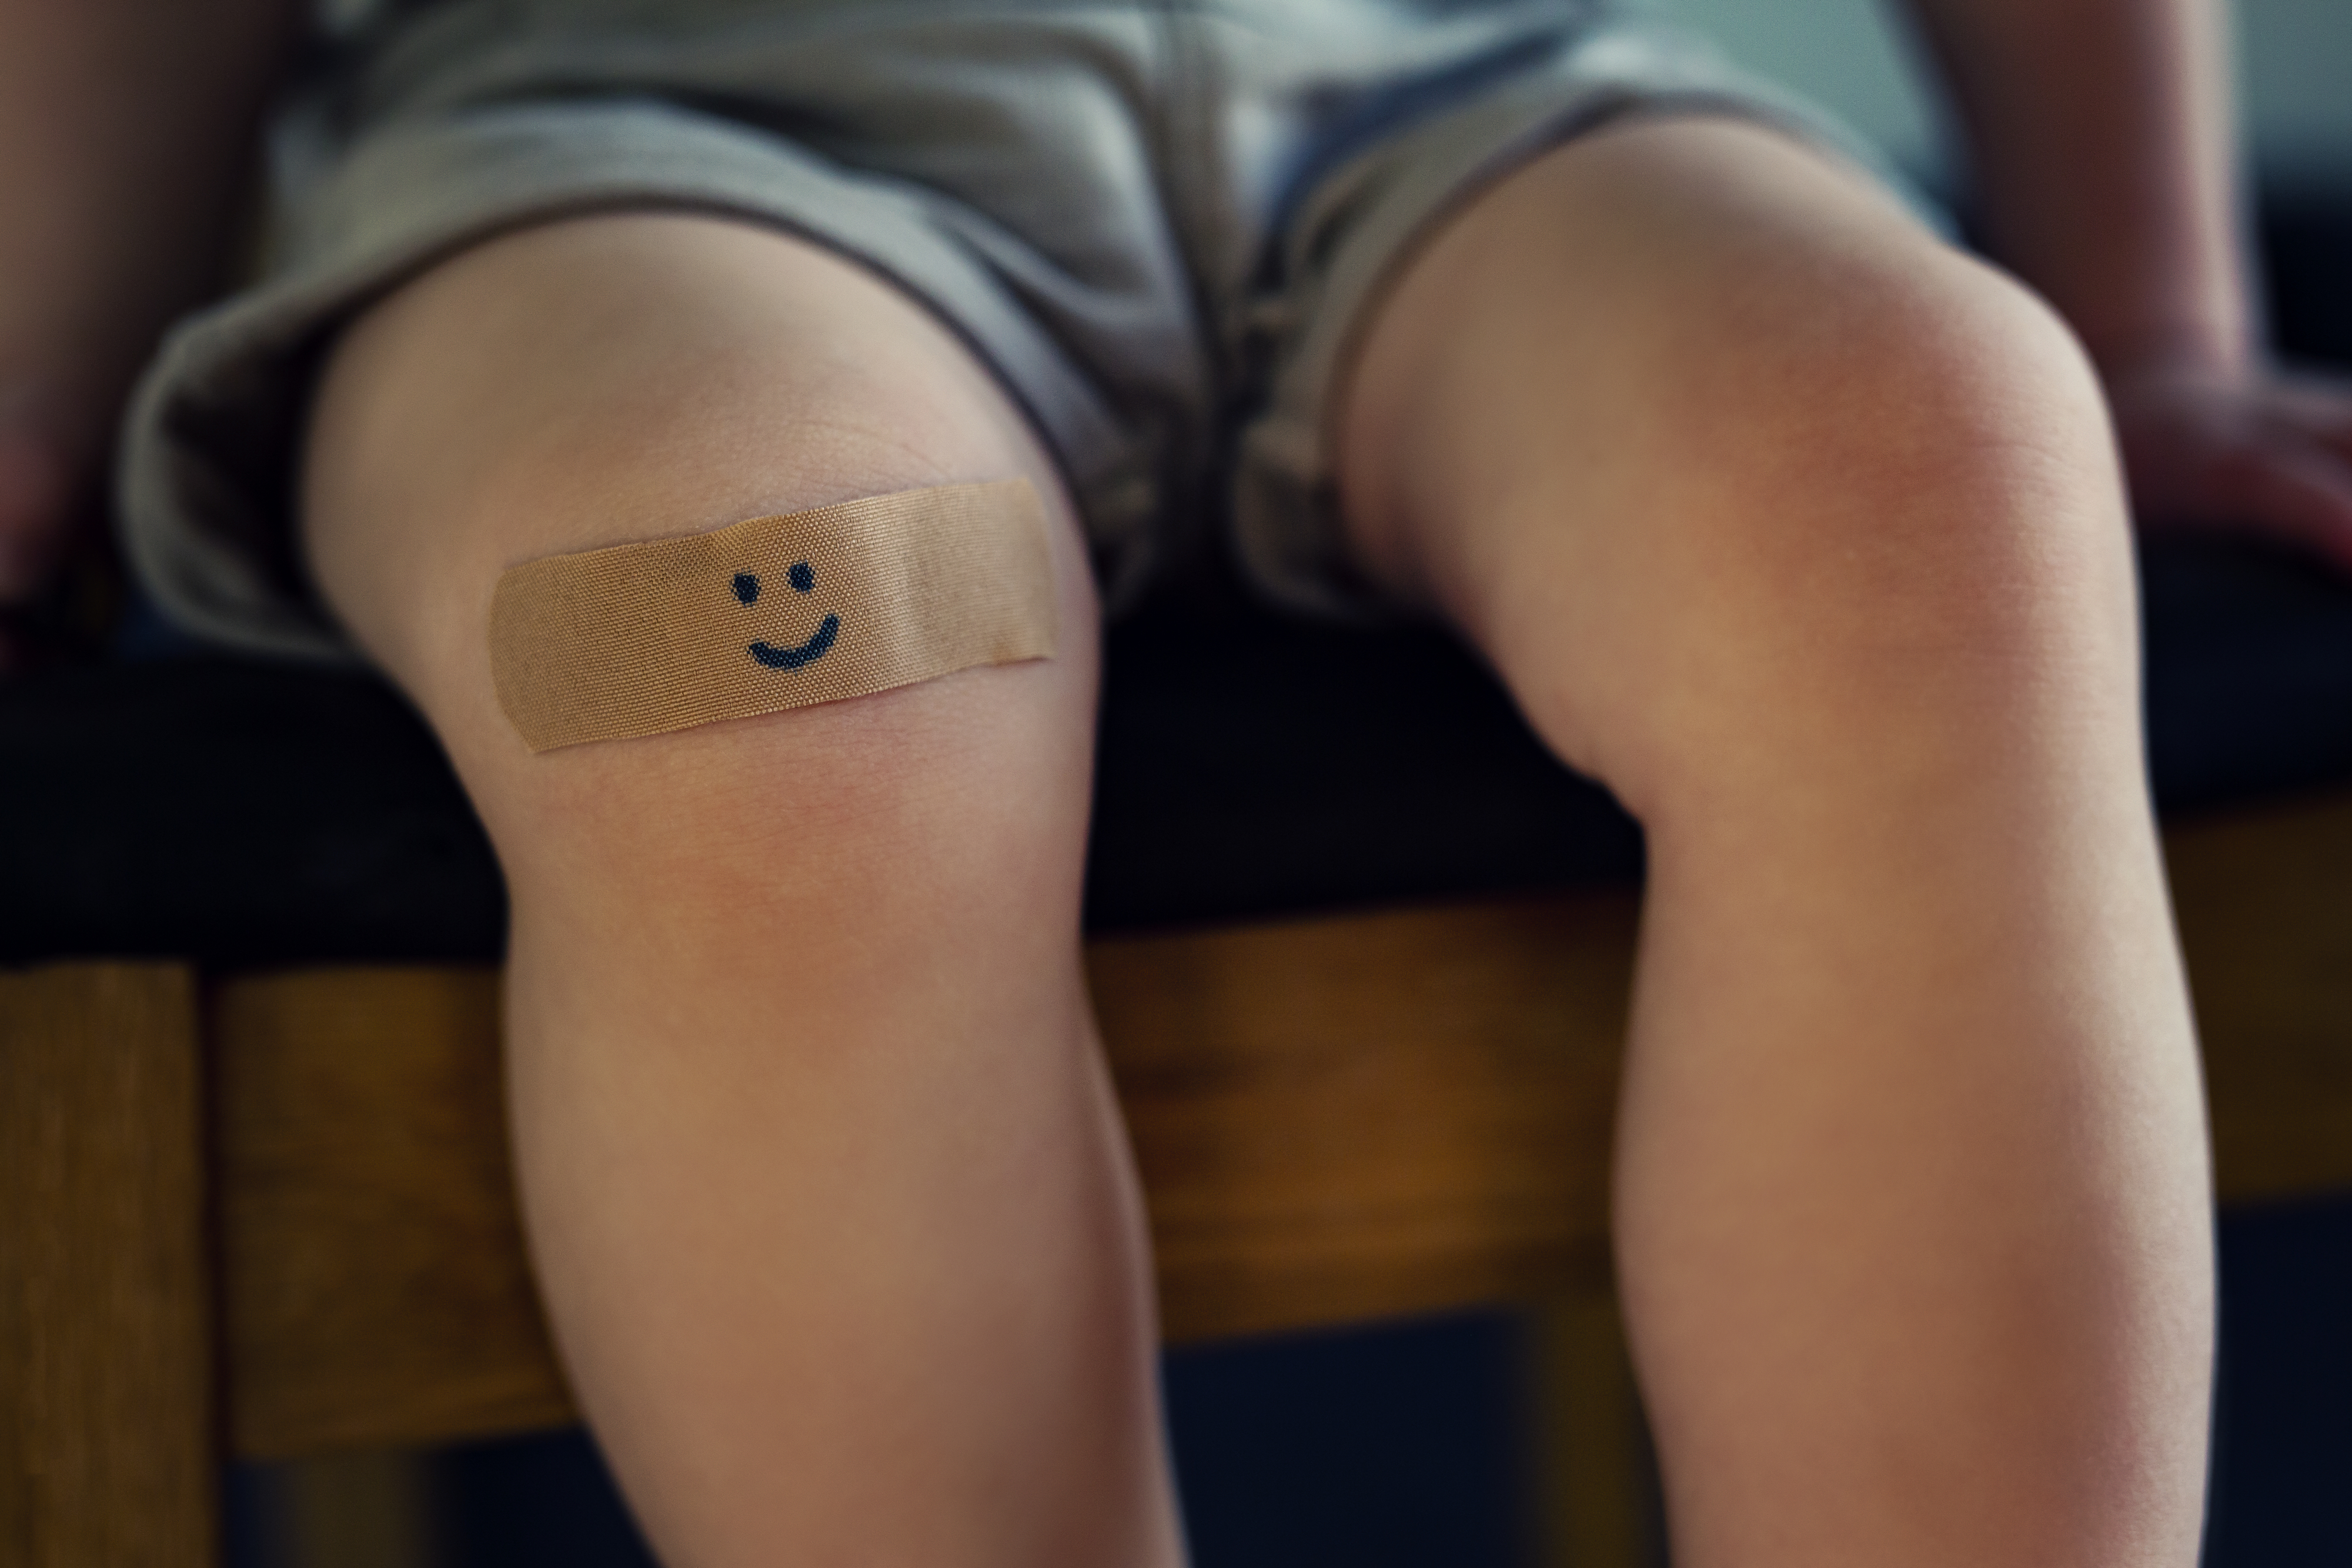 Child seated with a smiley-face bandage on the knee